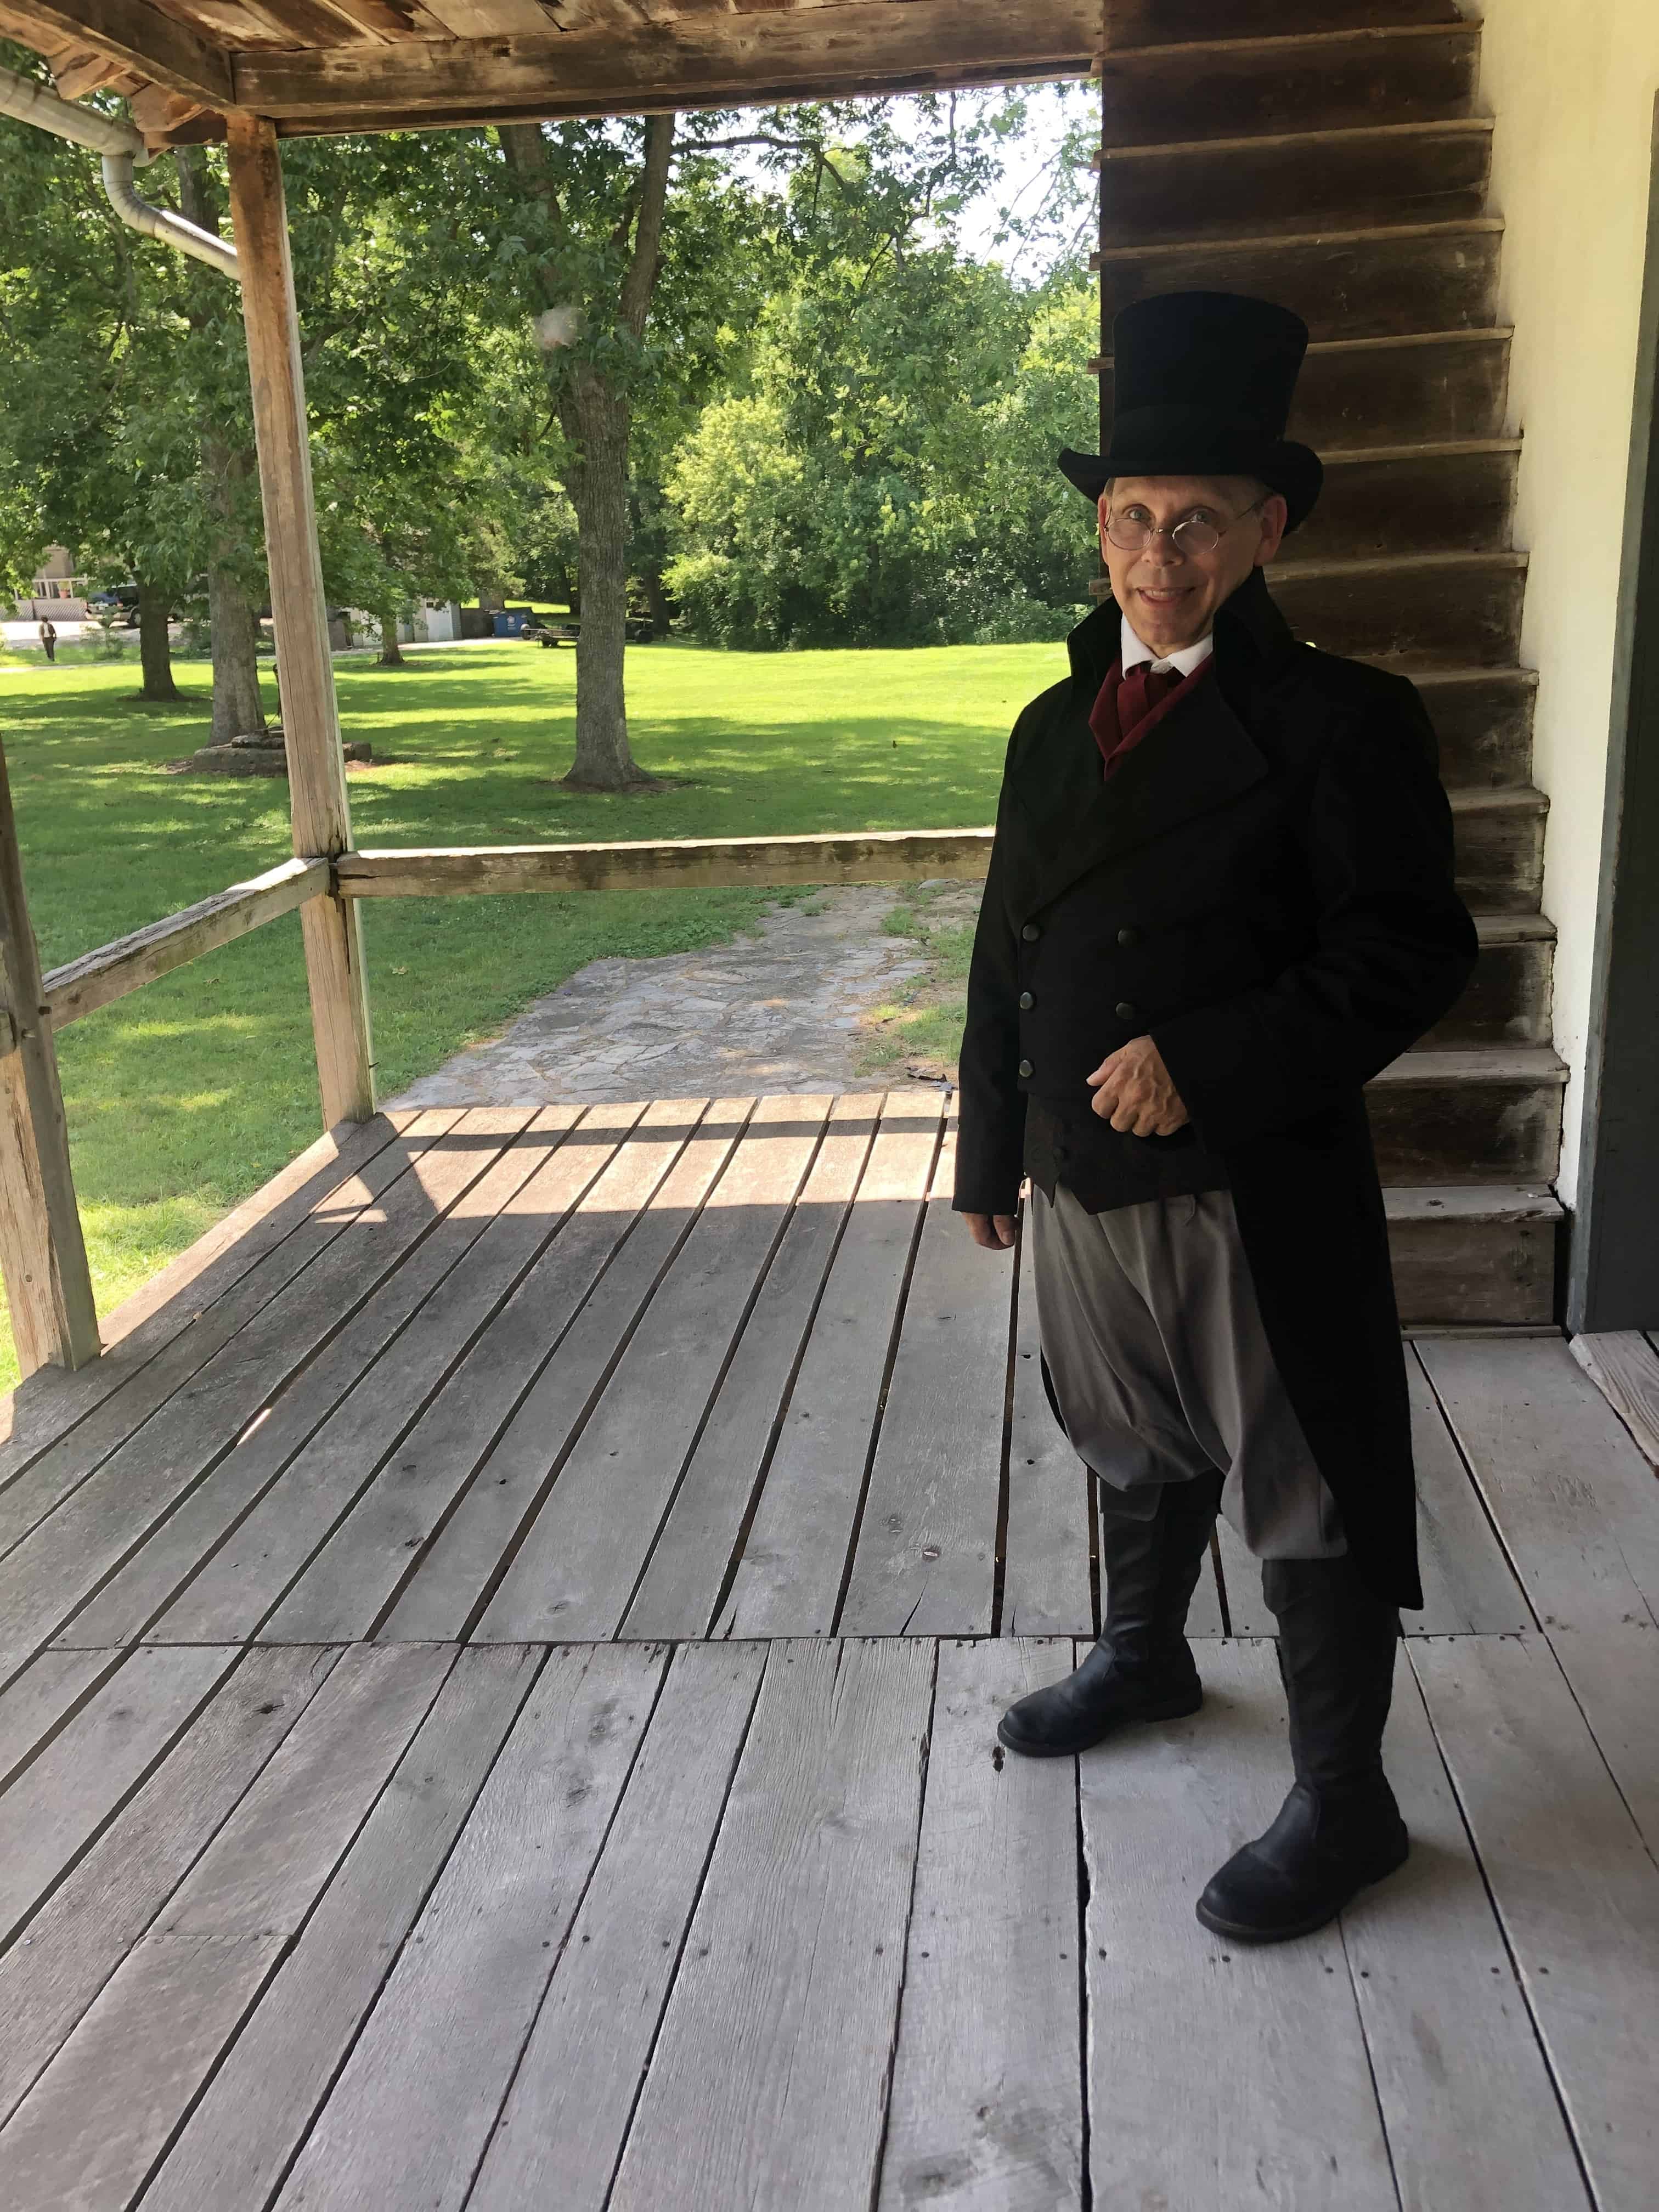 Historical actor at Ste. Genevieve, the newest of the national parks in Missouri.